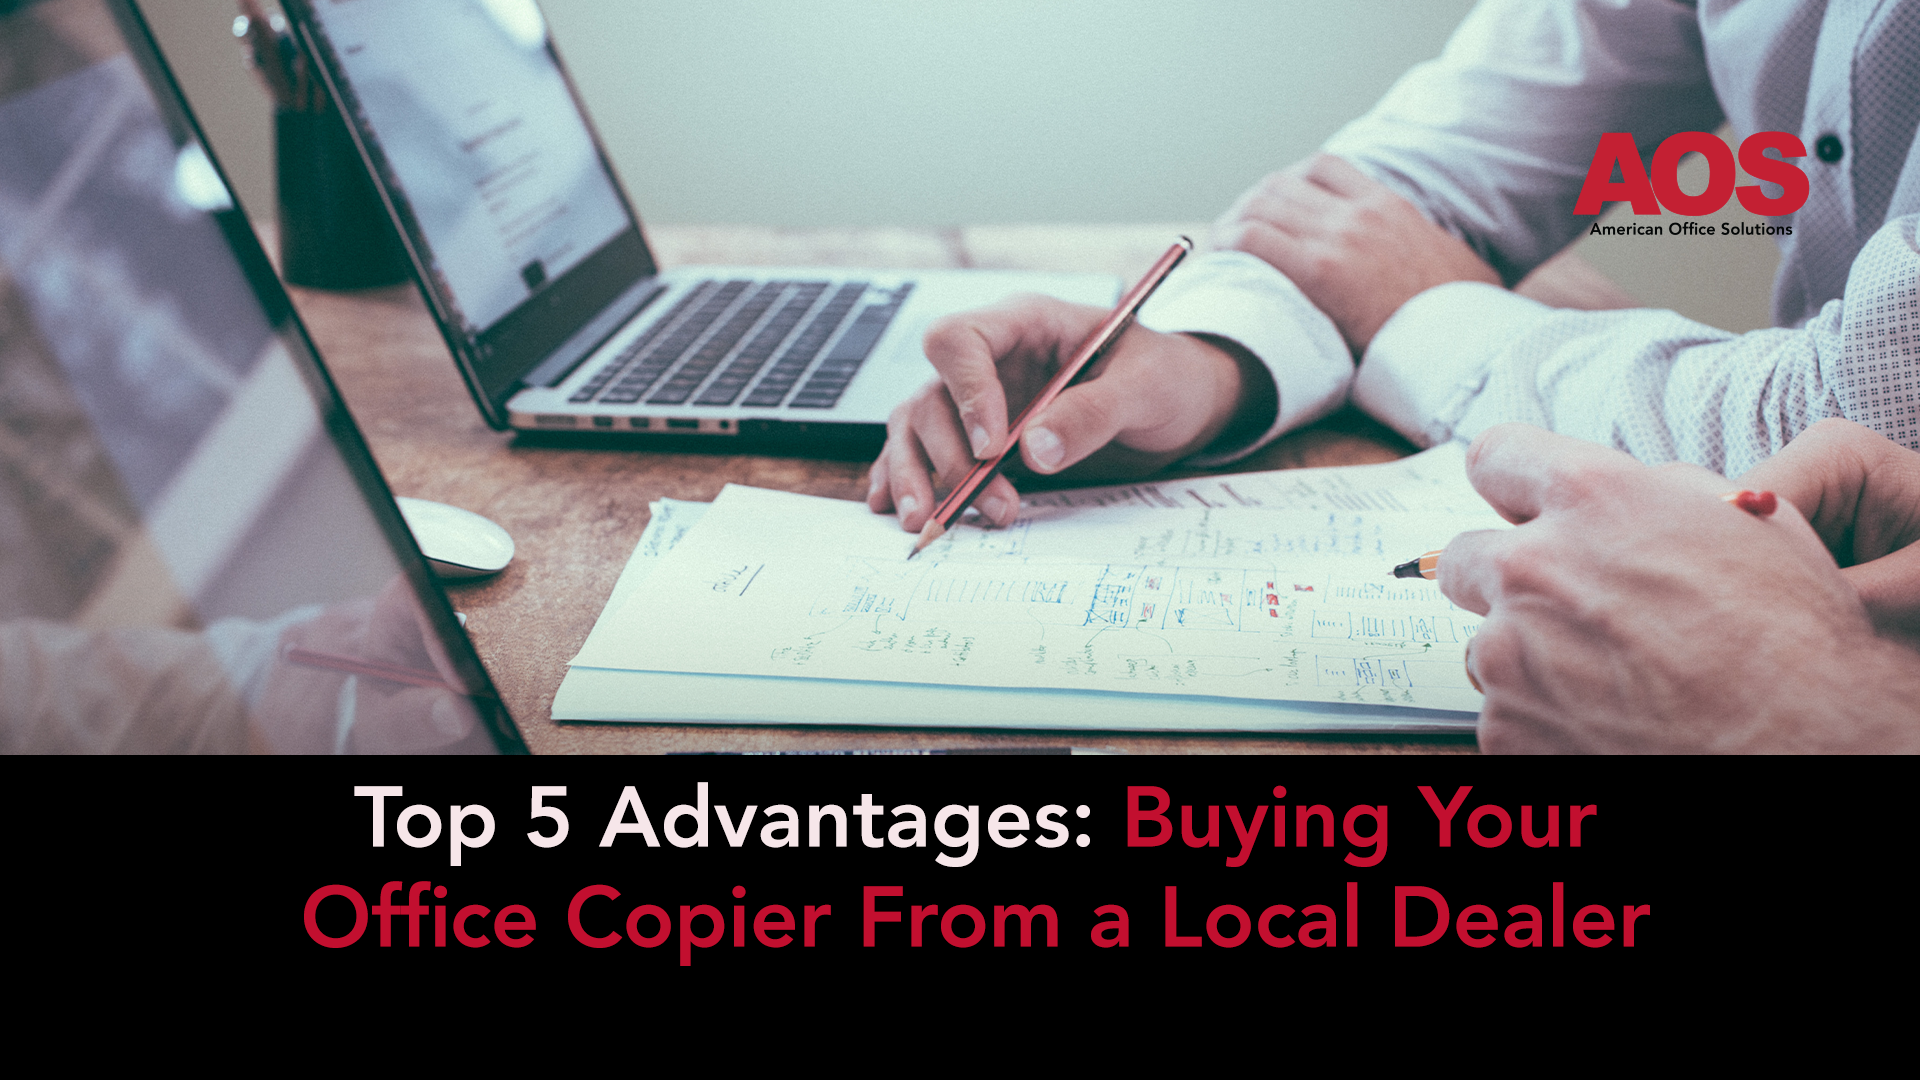 Top 5 Advantages of Buying Your Office Copier From a Local Dealer